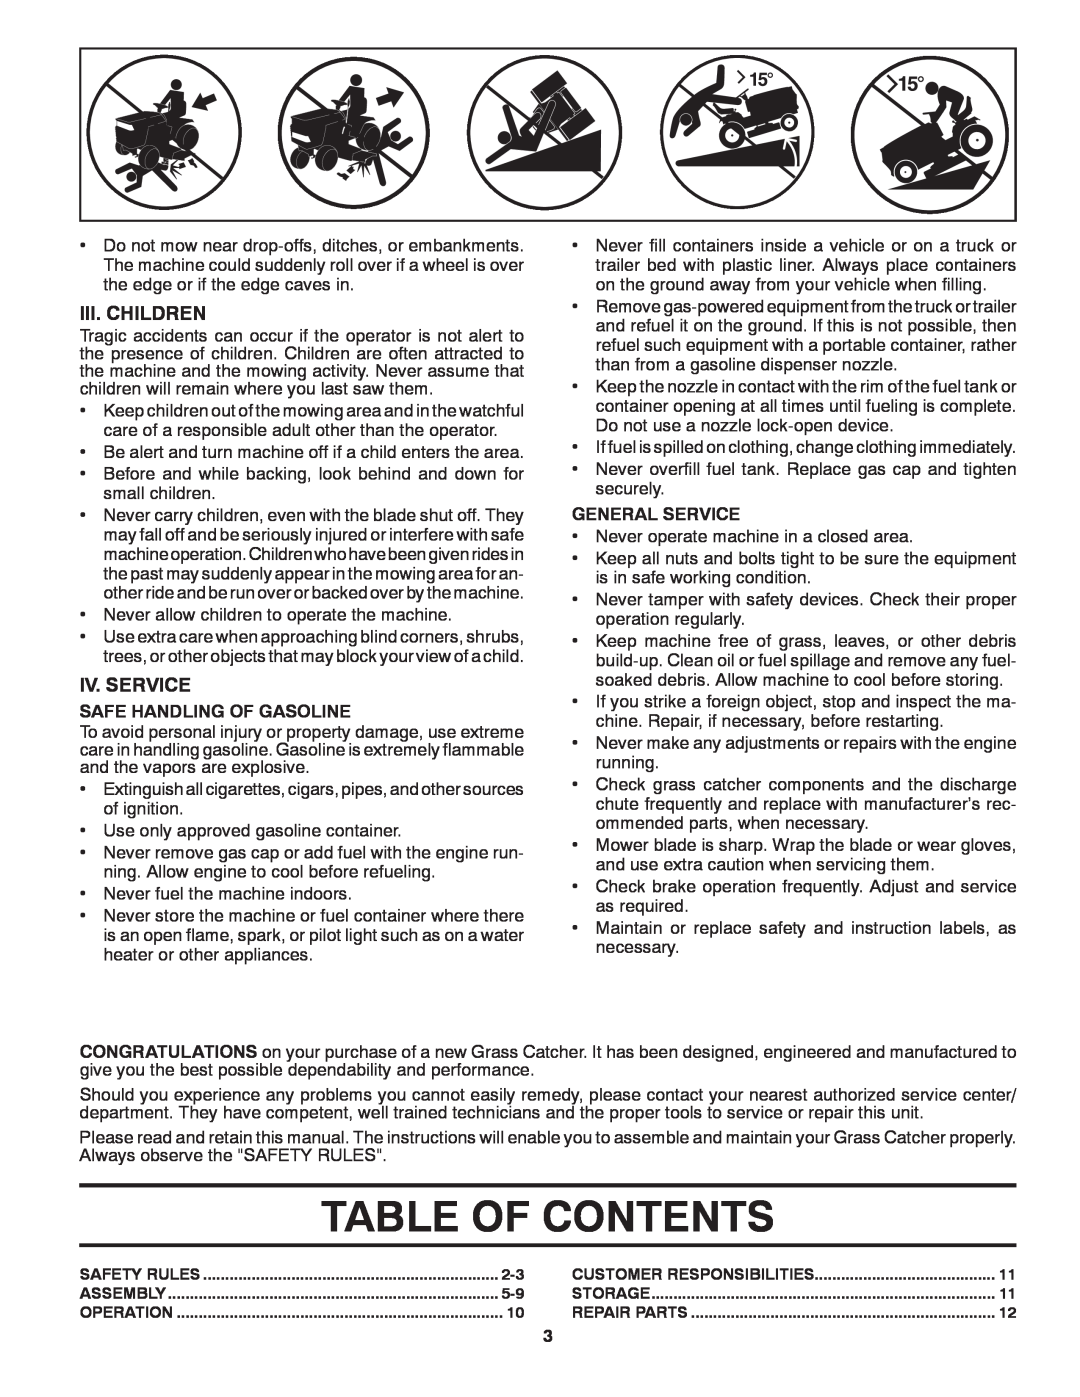 Weed Eater G26LRV, 960 73 00-27, 532 43 46-60 owner manual Table Of Contents, Iii. Children, Iv. Service 